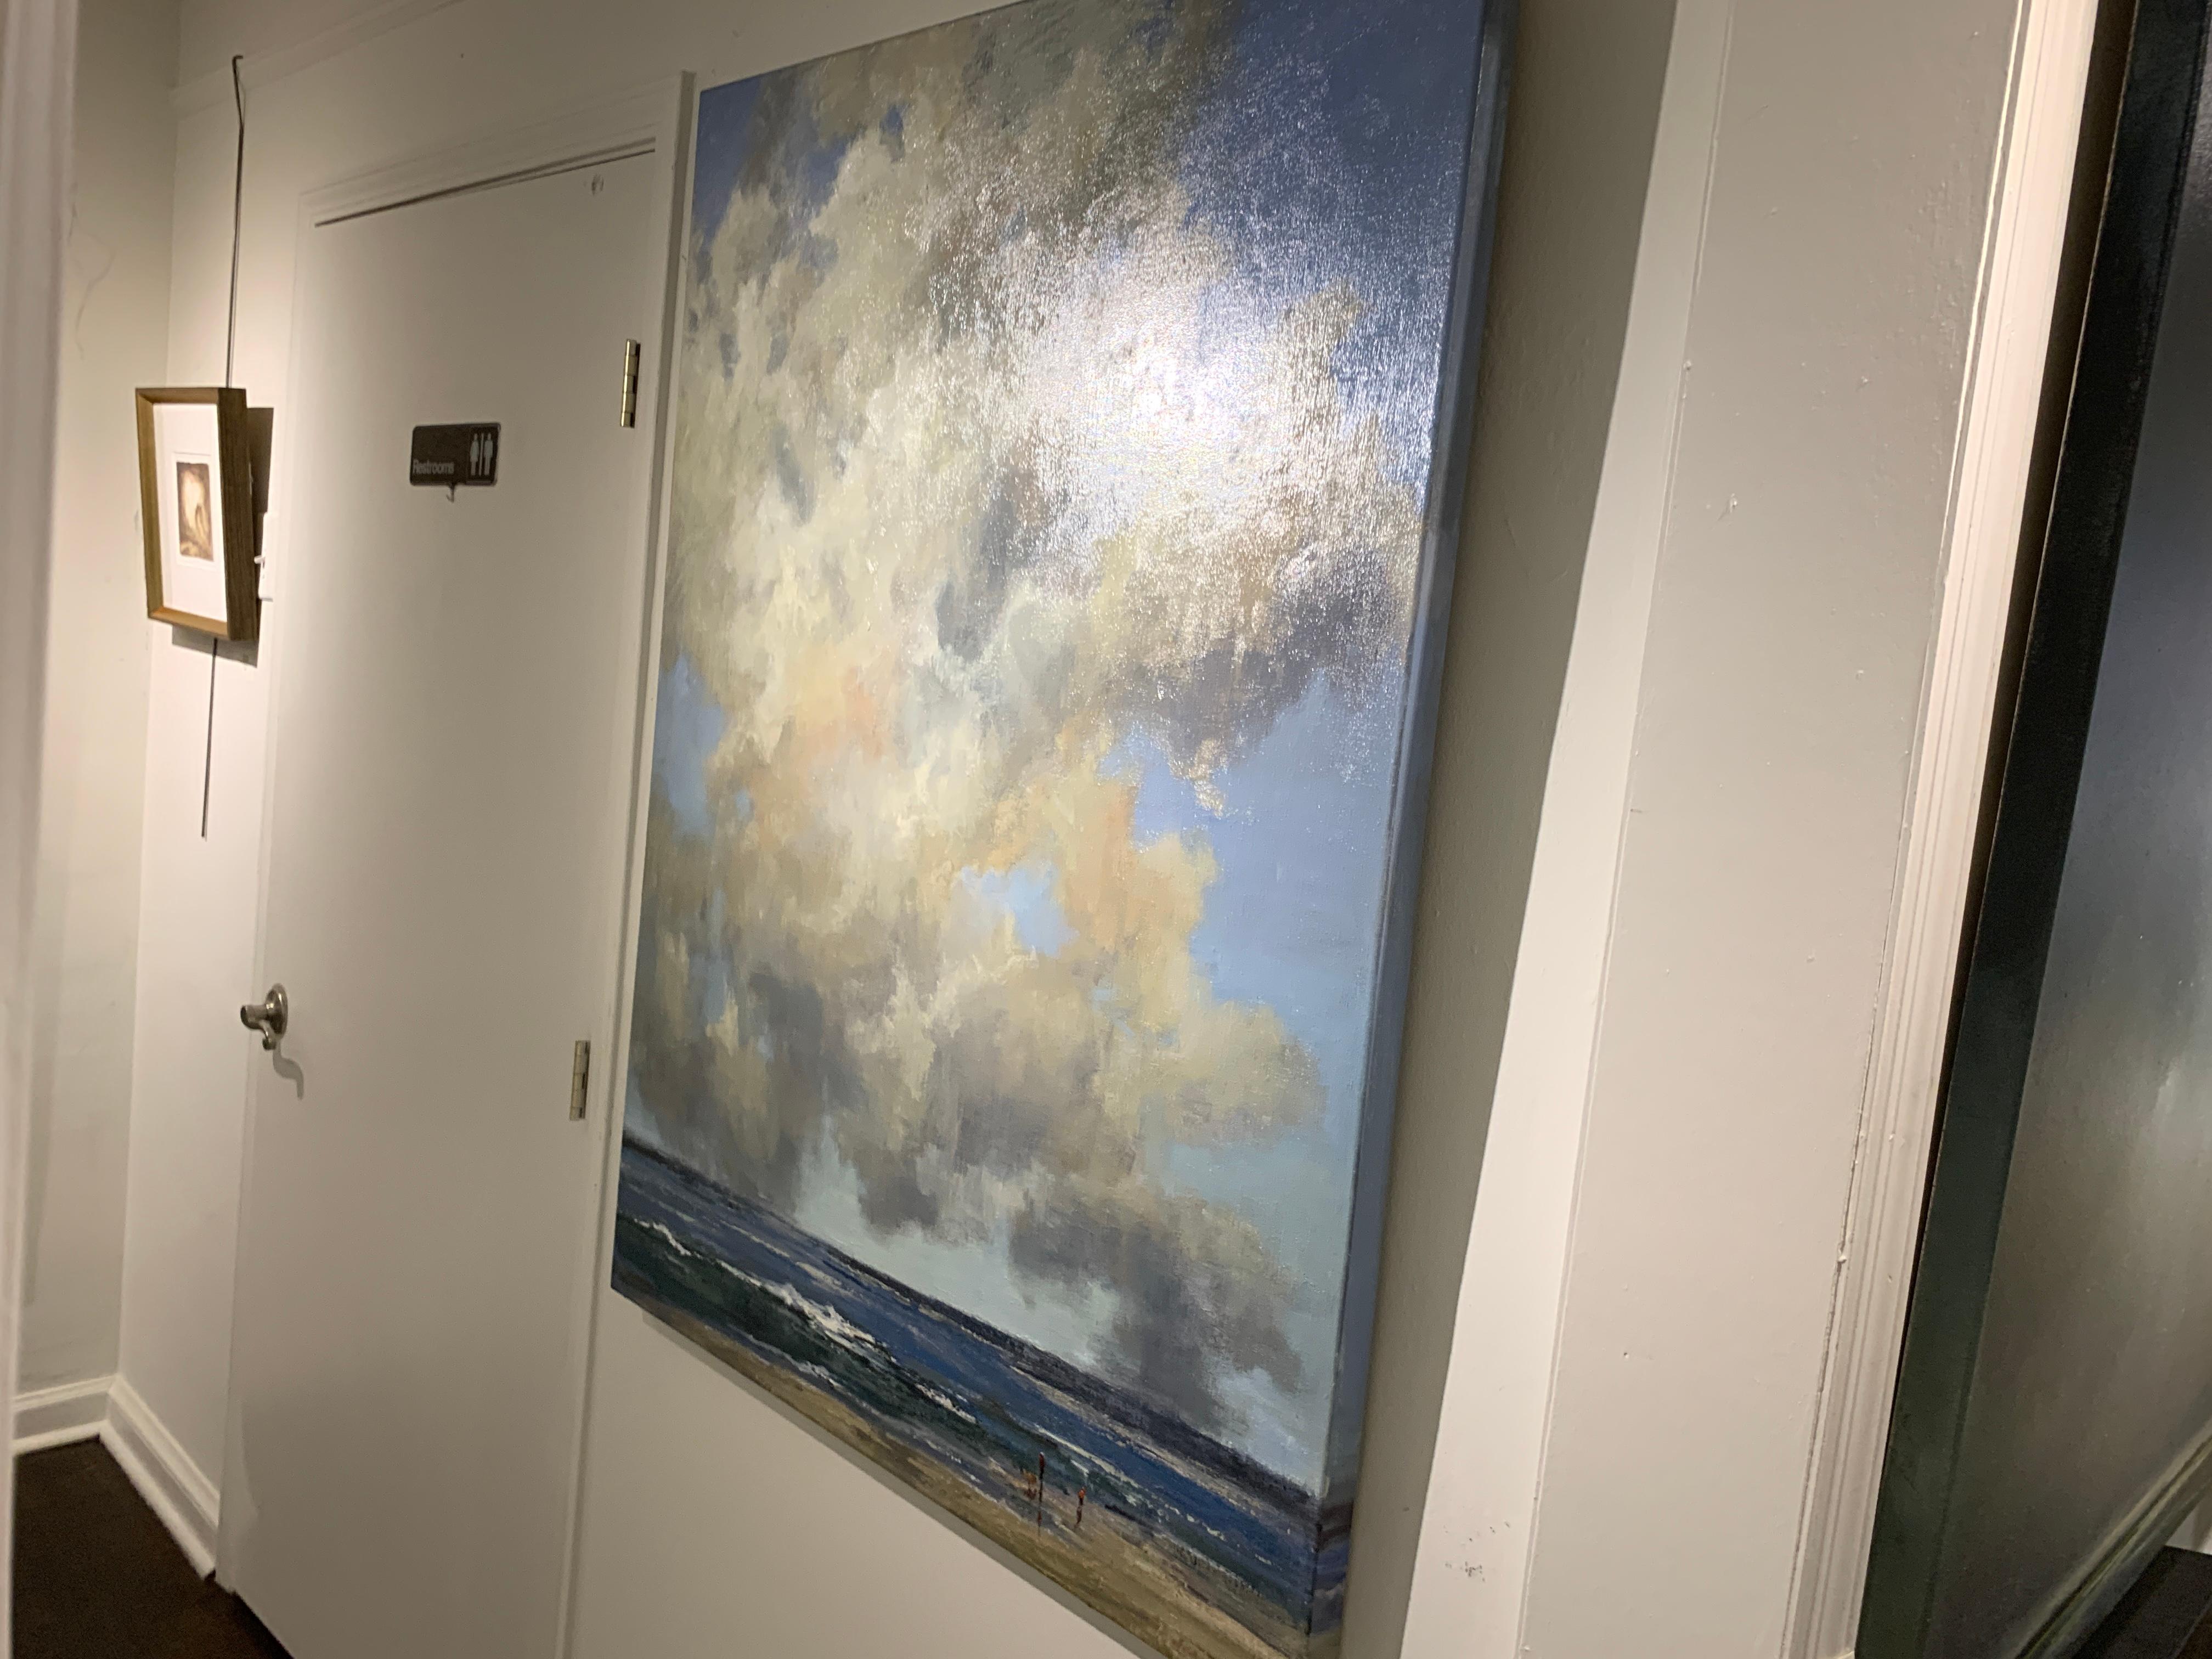 'As Old As Bliss' is a large vertical Impressionist oil on linen painting created by American artist Bethanne Cople in 2019. Featuring a palette made of blue, grey, brown and ochre tones, the painting depicts a seashore. Upon closer inspection, one